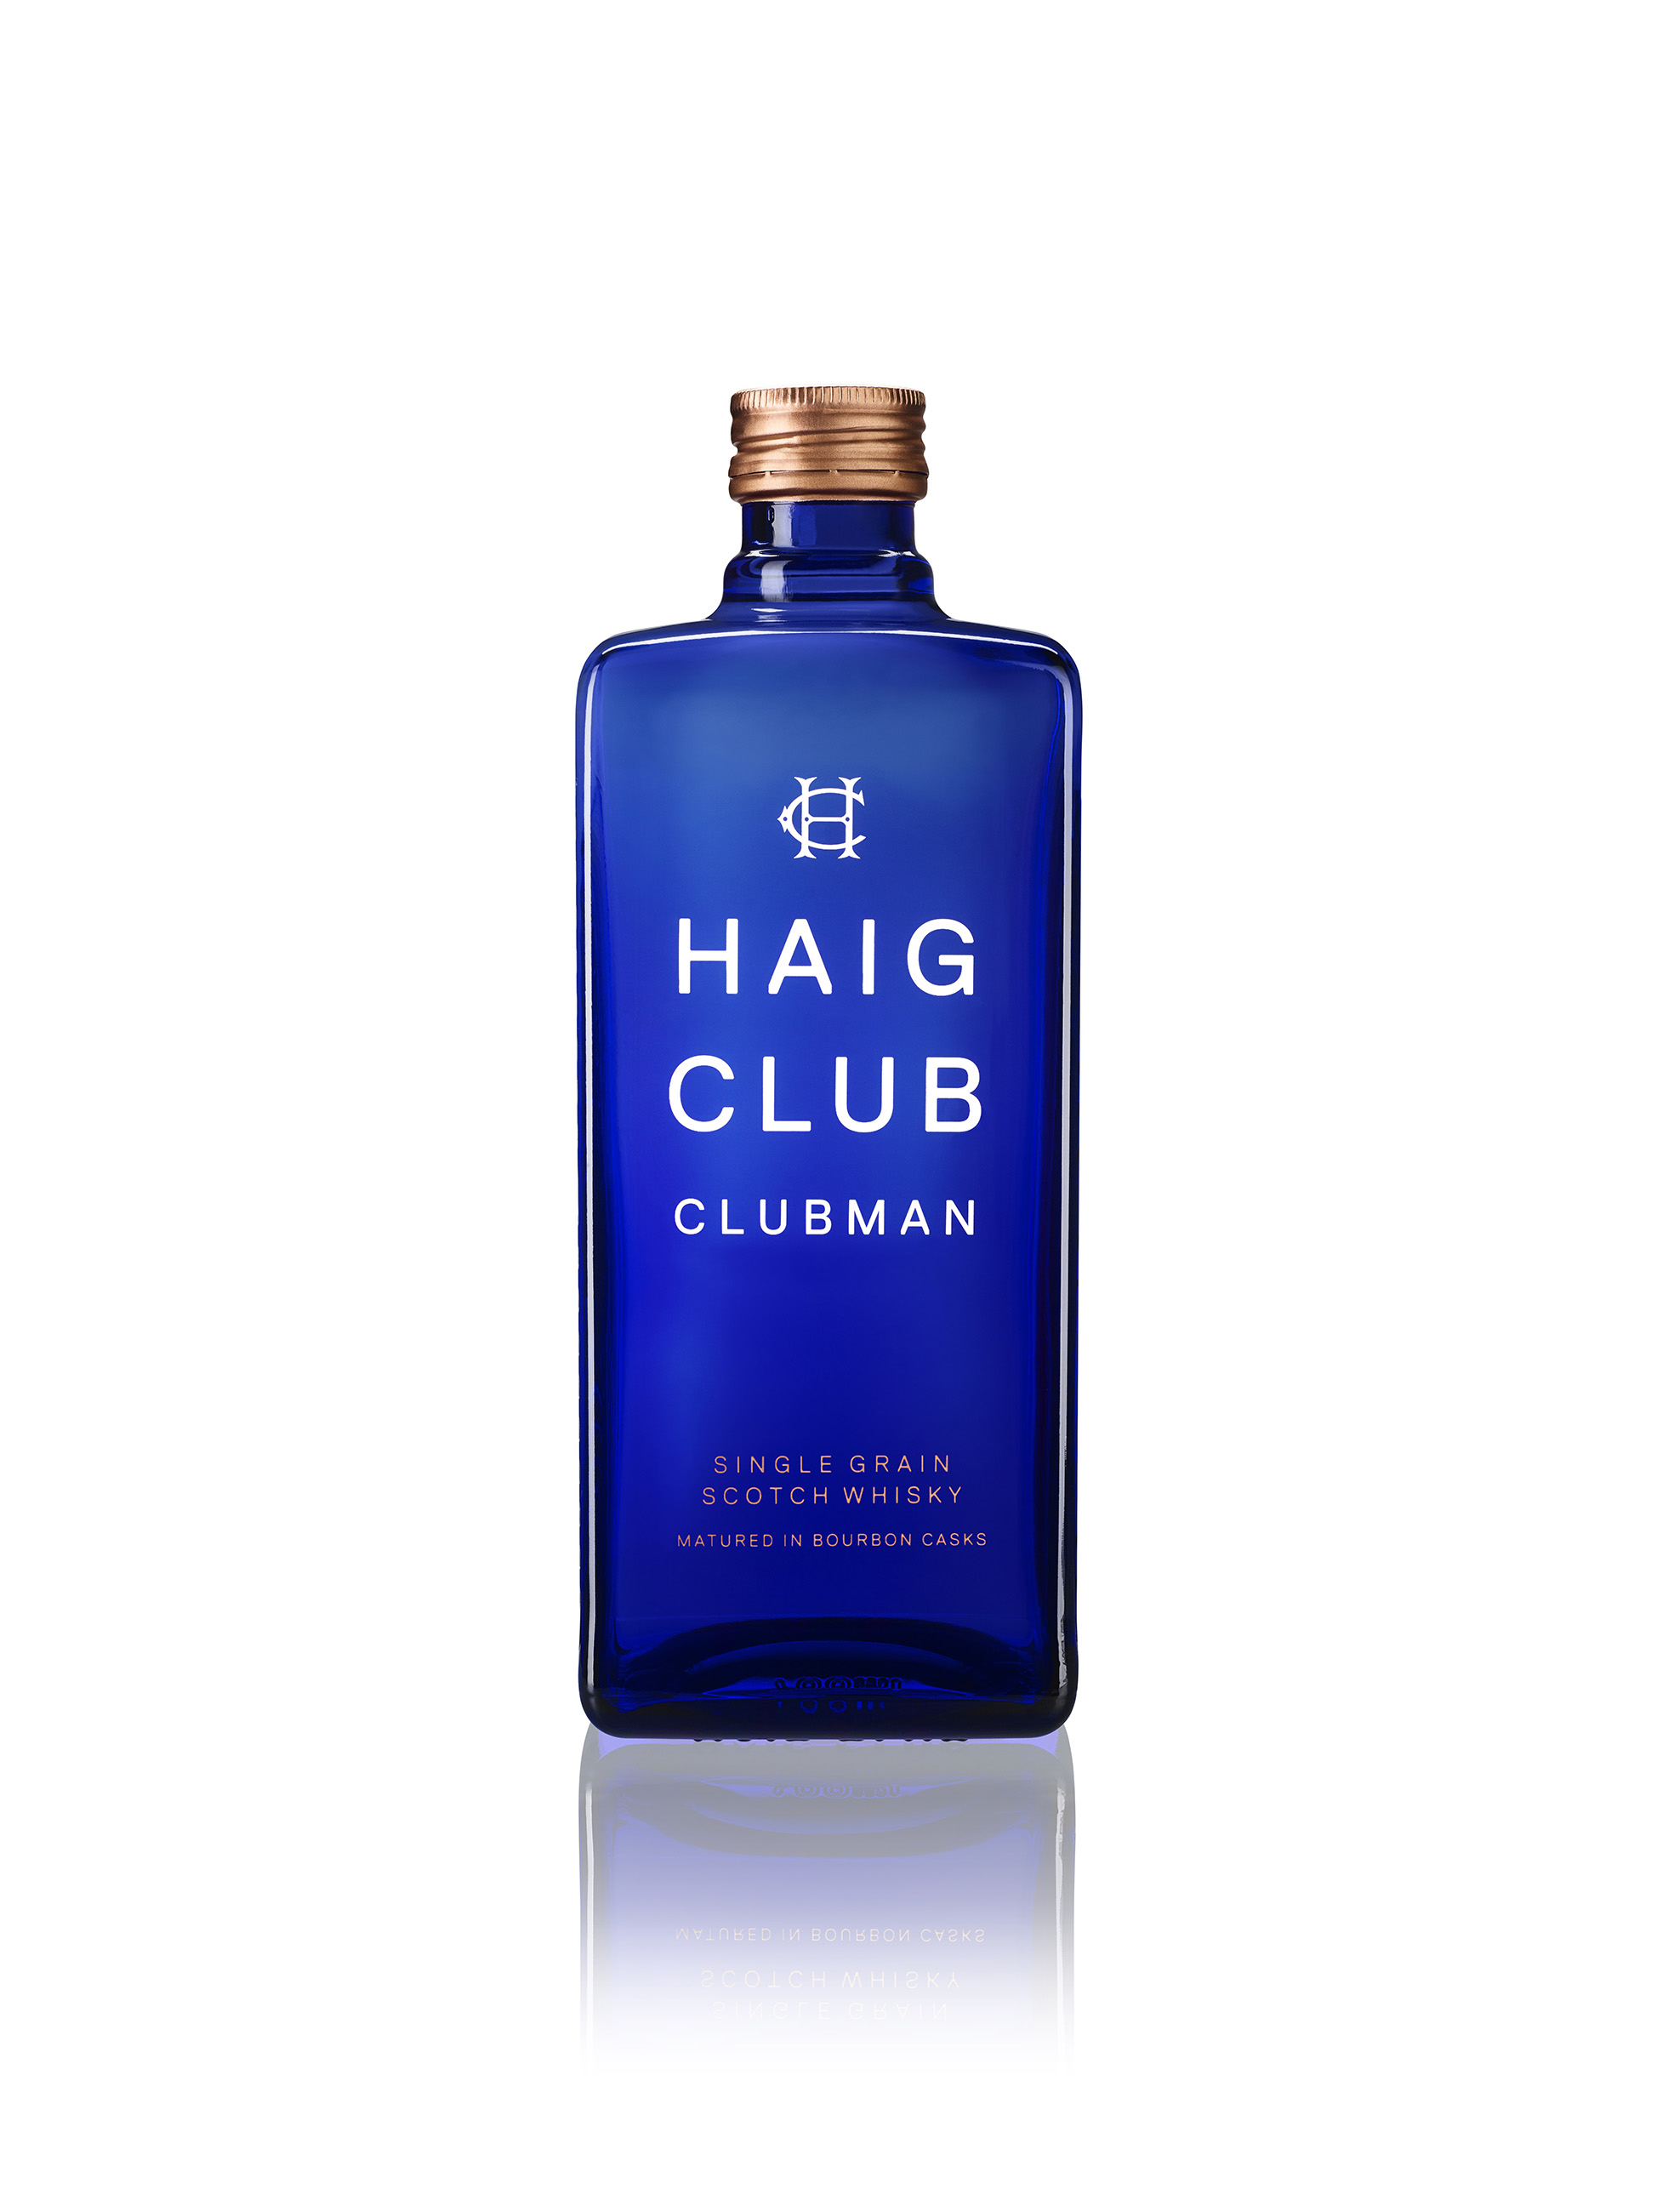 HAIG CLUB Releases A Night Out With David Beckham…In Reverse